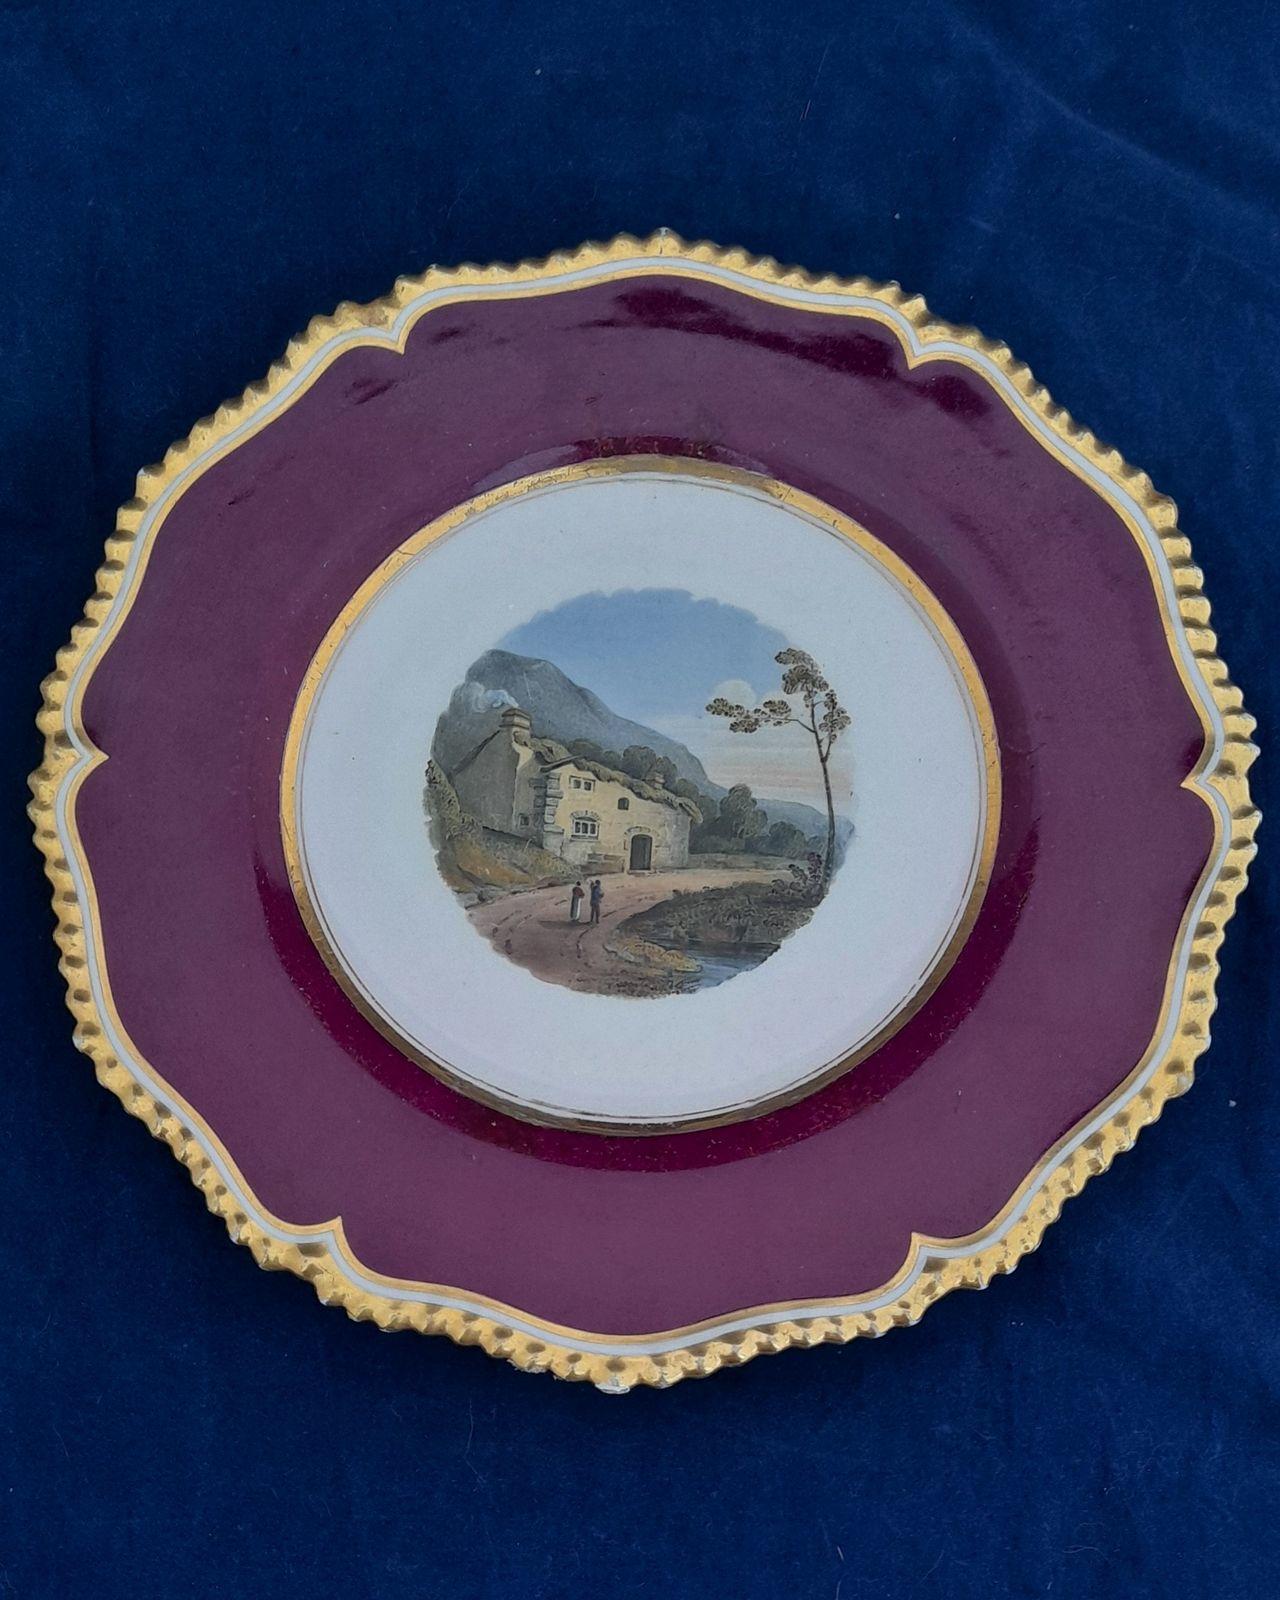 An antique Flight Barr and Barr Worcester Porcelain dessert plate hand painted with a landscape pattern titled Patterdale circa 1825.  The scene is after an oil painting exhibited in the RA in 1783 by Philip James de Loutherbourg  (1740-1812) of a horse and cart outside a cottage in Patterdale, Westmorland. his very fine English porcelain plate carries the impressed mark on the base of a crowned FBB for  Flight,Barr and Barr who operated from 1813 until 1840. The back also has the hand painted mark in puce " Flight Barr and Barr, Royal Porcelain Works, London House No,1 Coventry Street".